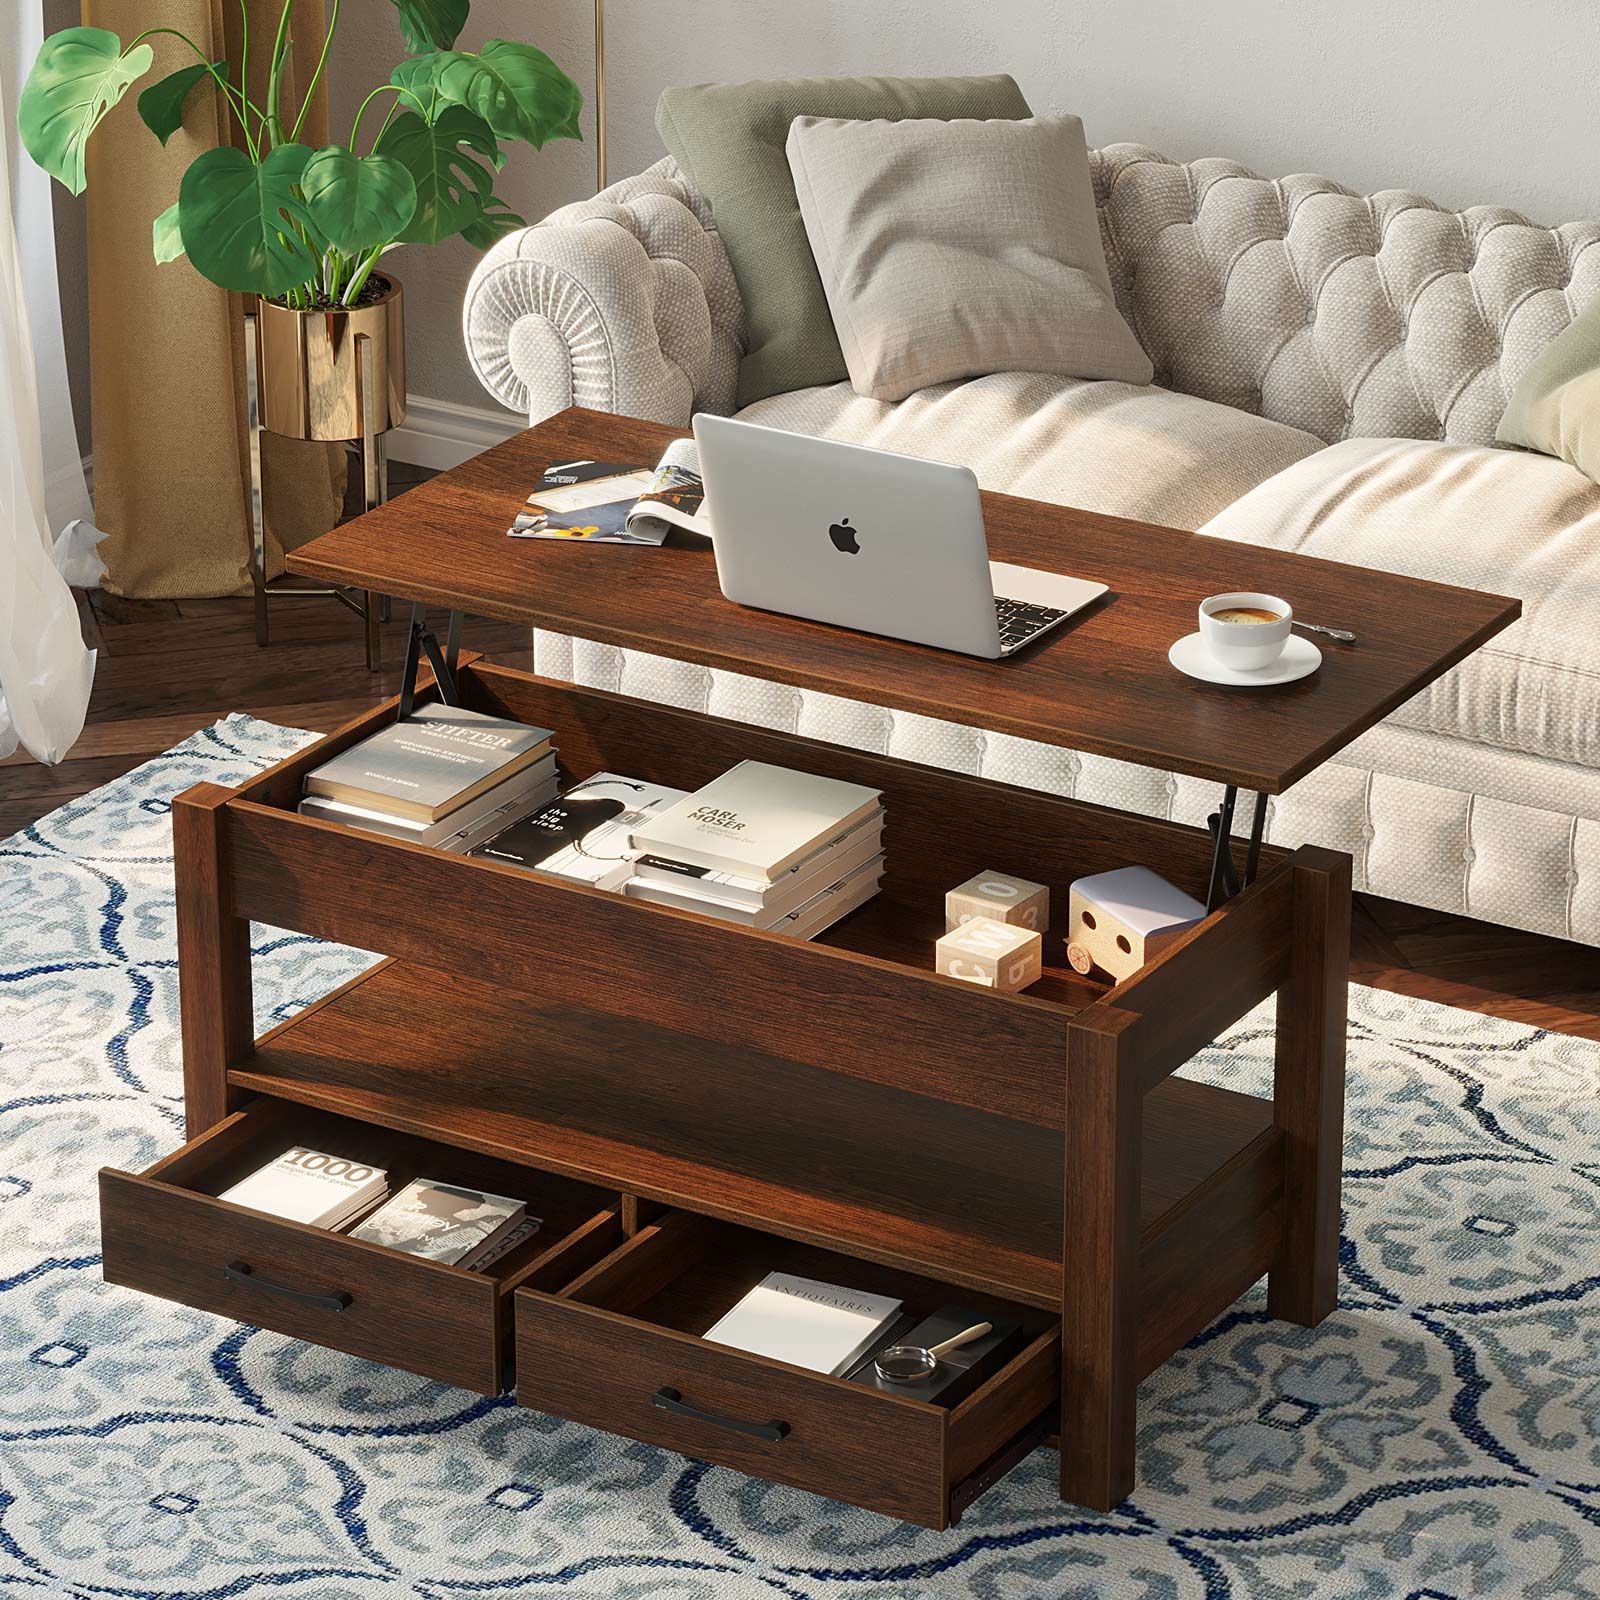 Rolanstar Coffee Table, Lift Top Coffee Table With Drawers And Hidden For Lift Top Coffee Tables With Shelves (Gallery 16 of 20)